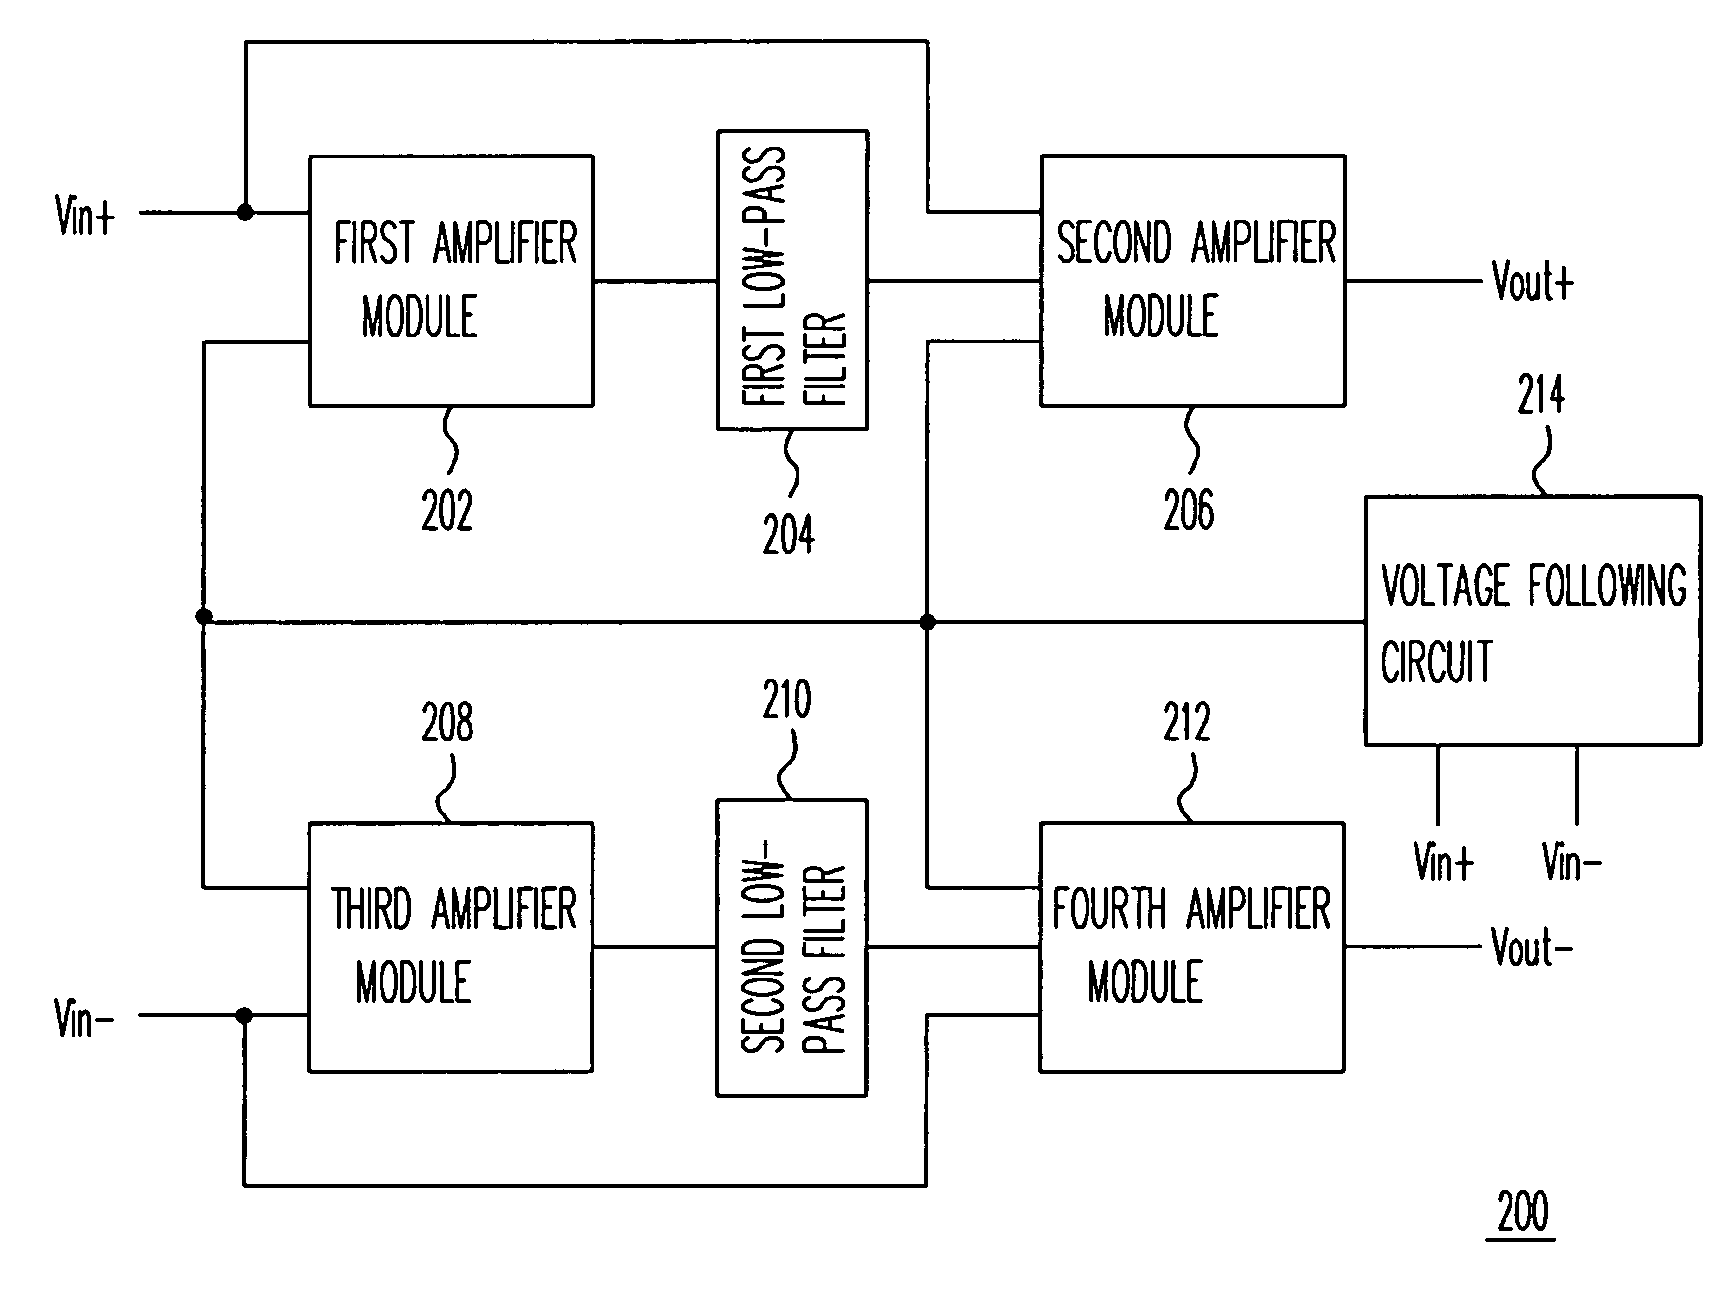 Apparatus for removing DC offset and amplifying signal with variable gain simutaneously